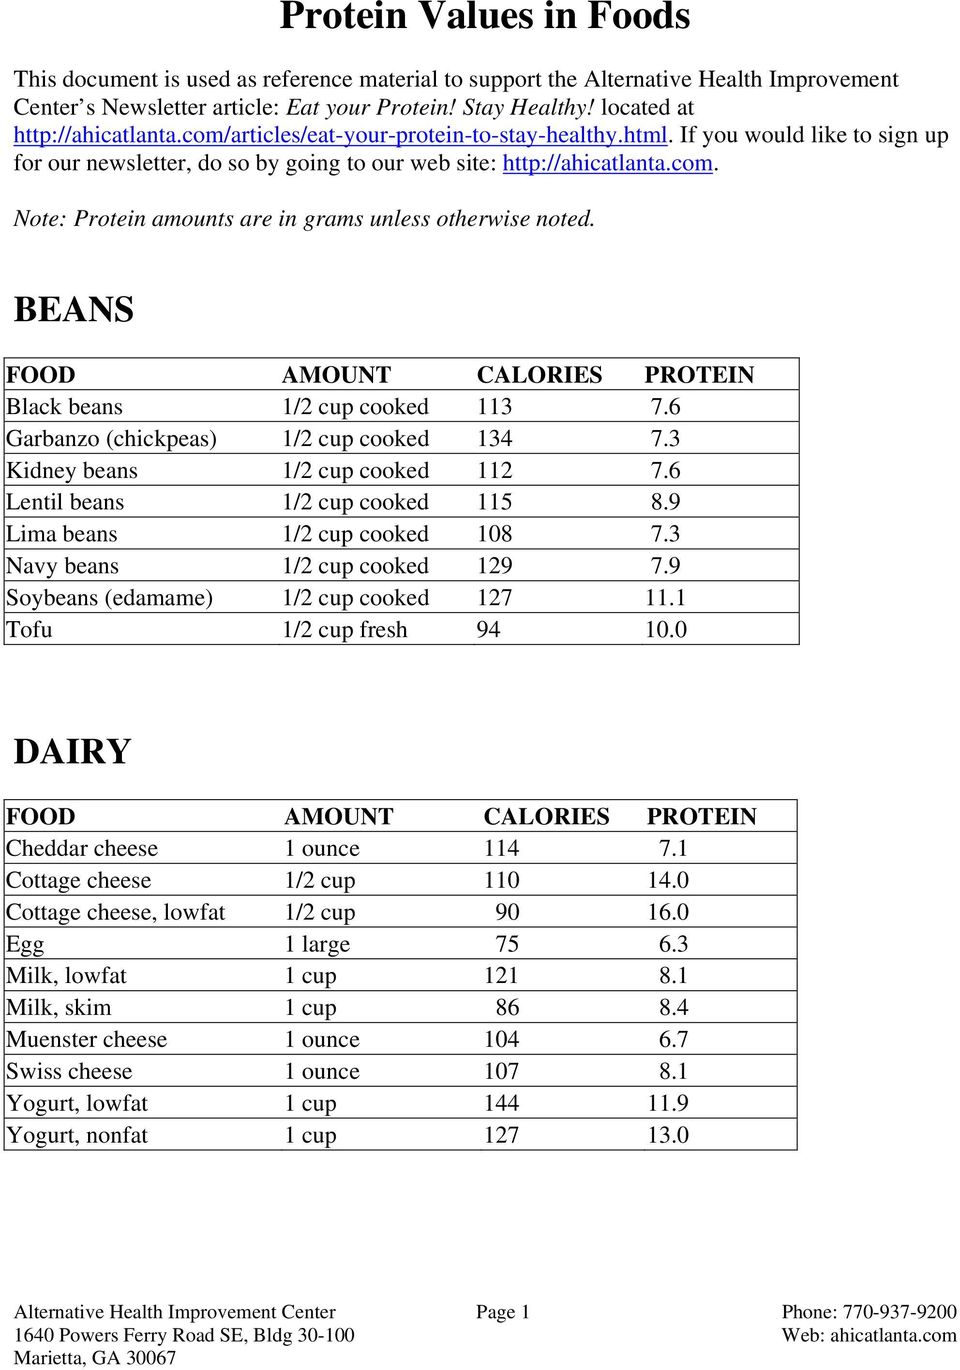 BEANS Black beans 1/2 cup cooked 113 7.6 Garbanzo (chickpeas) 1/2 cup cooked 134 7.3 Kidney beans 1/2 cup cooked 112 7.6 Lentil beans 1/2 cup cooked 115 8.9 Lima beans 1/2 cup cooked 108 7.